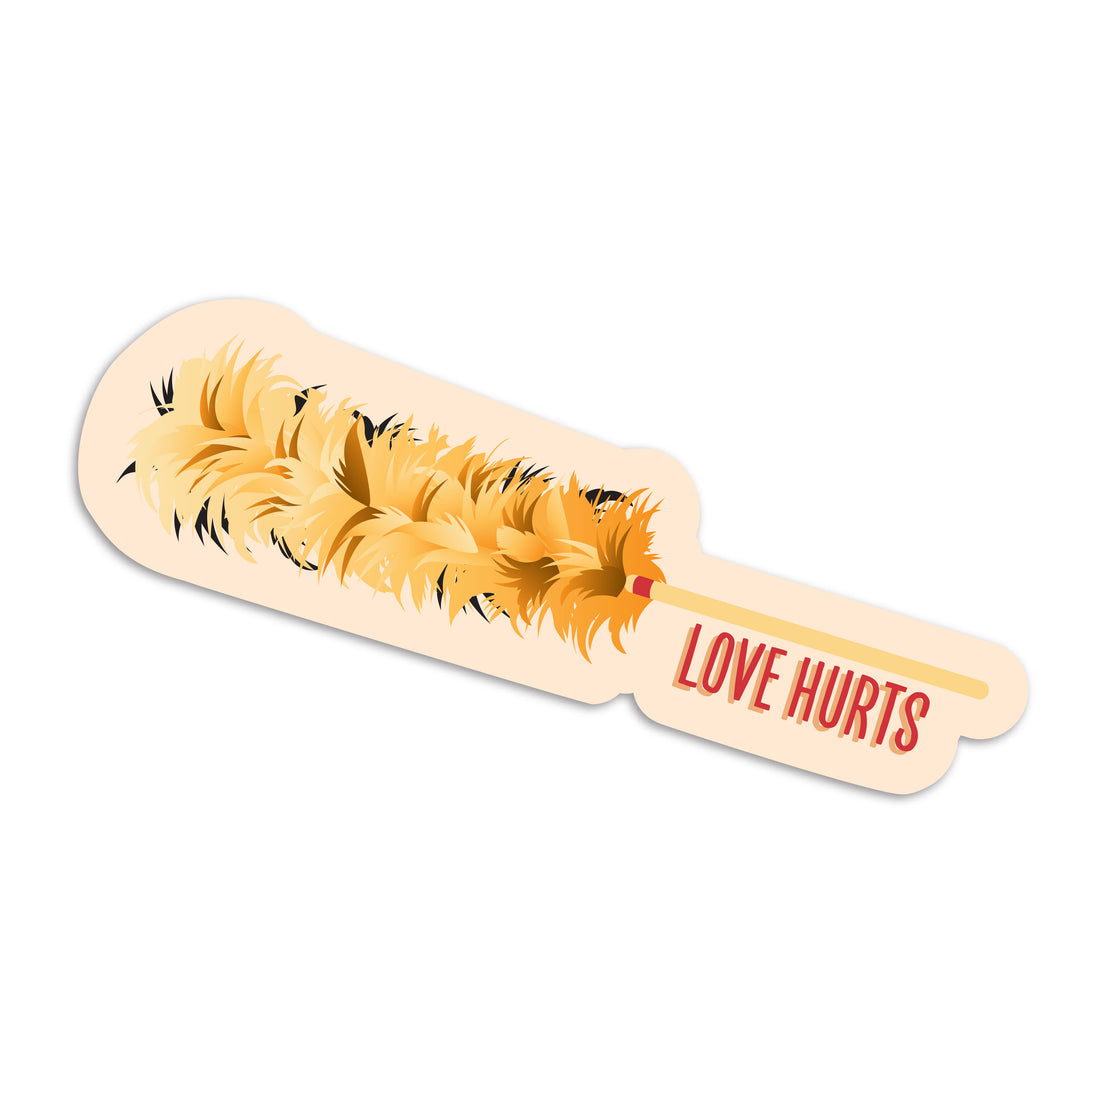 Love hurts feather duster vinyl sticker by I&